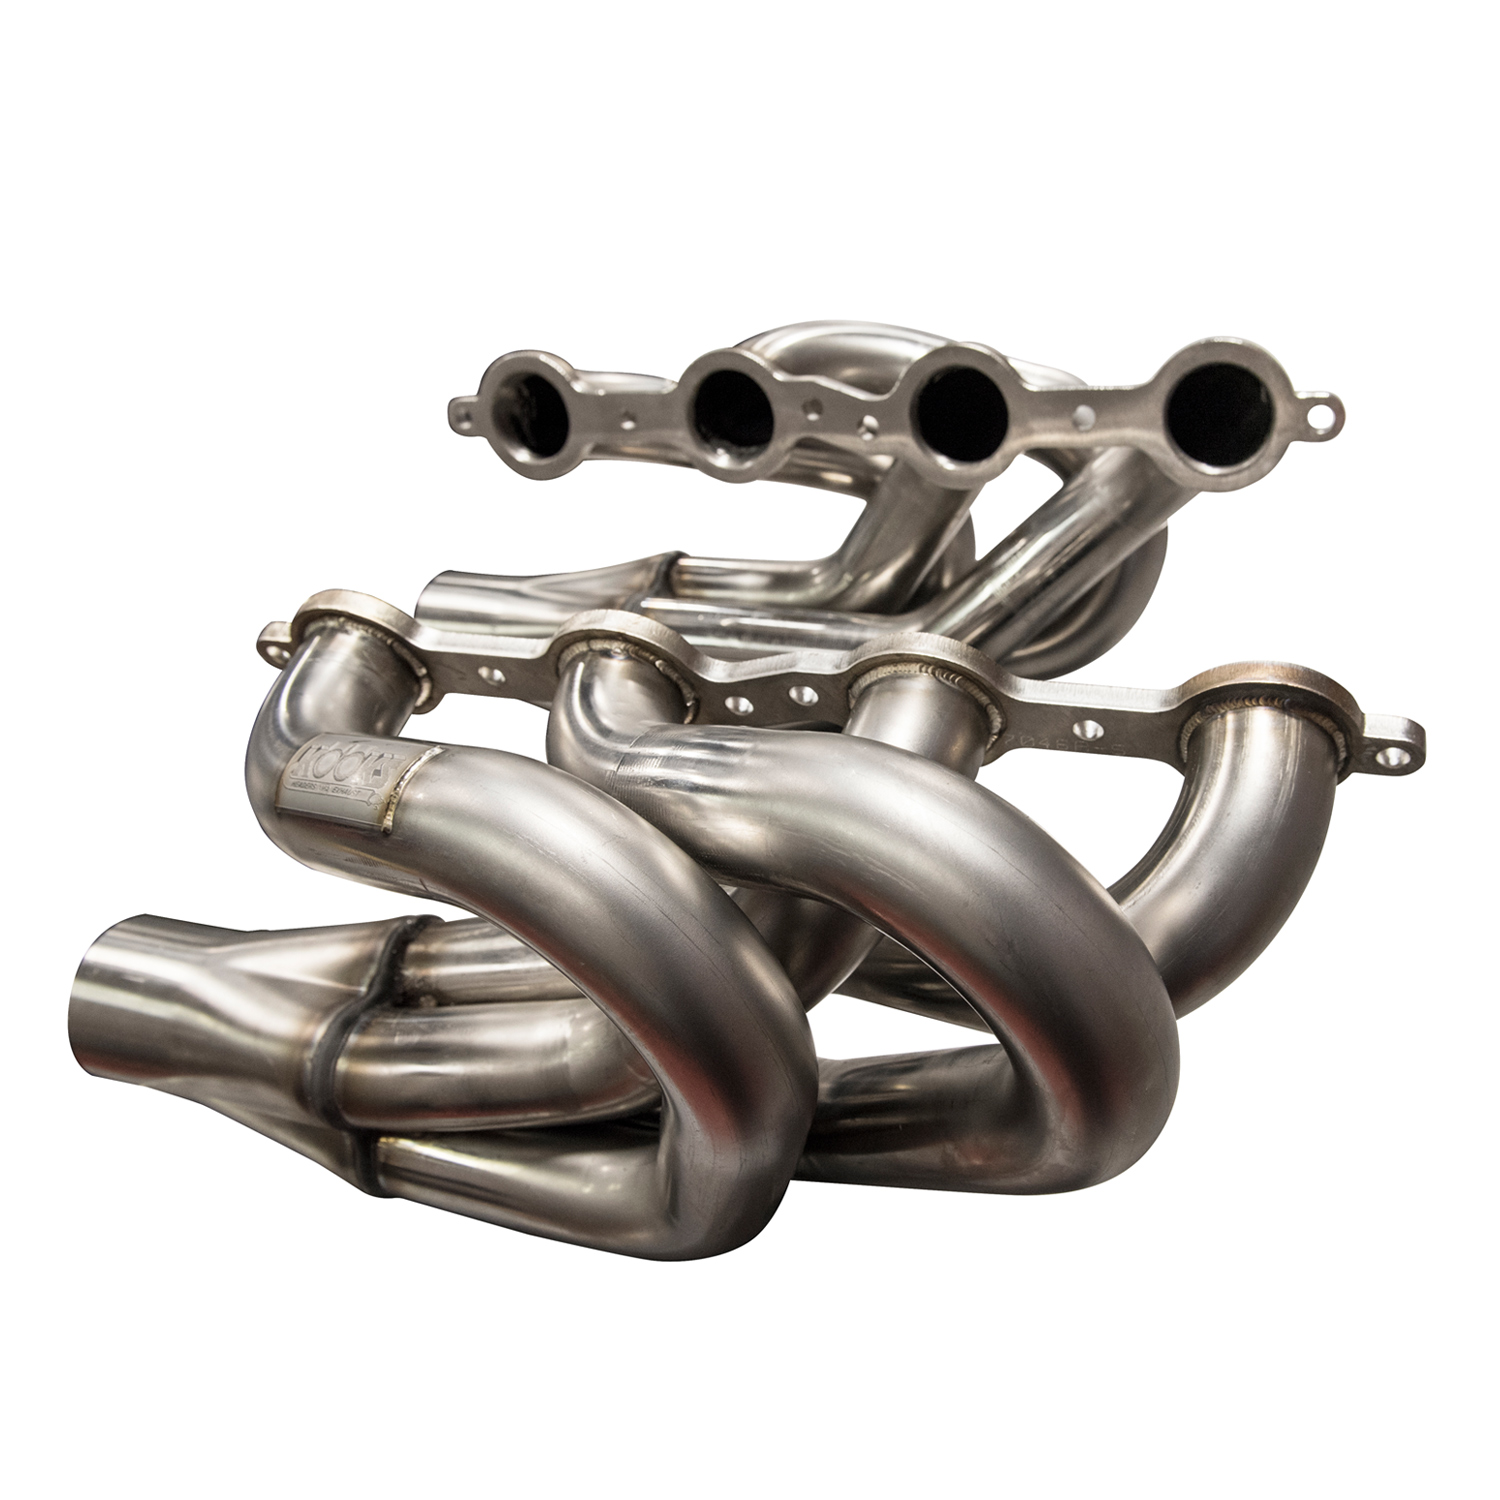 Stainless Steel Turbo Shorty Headers 1.75 x 2.5" Downswept 14 Gauge Stainless Steel